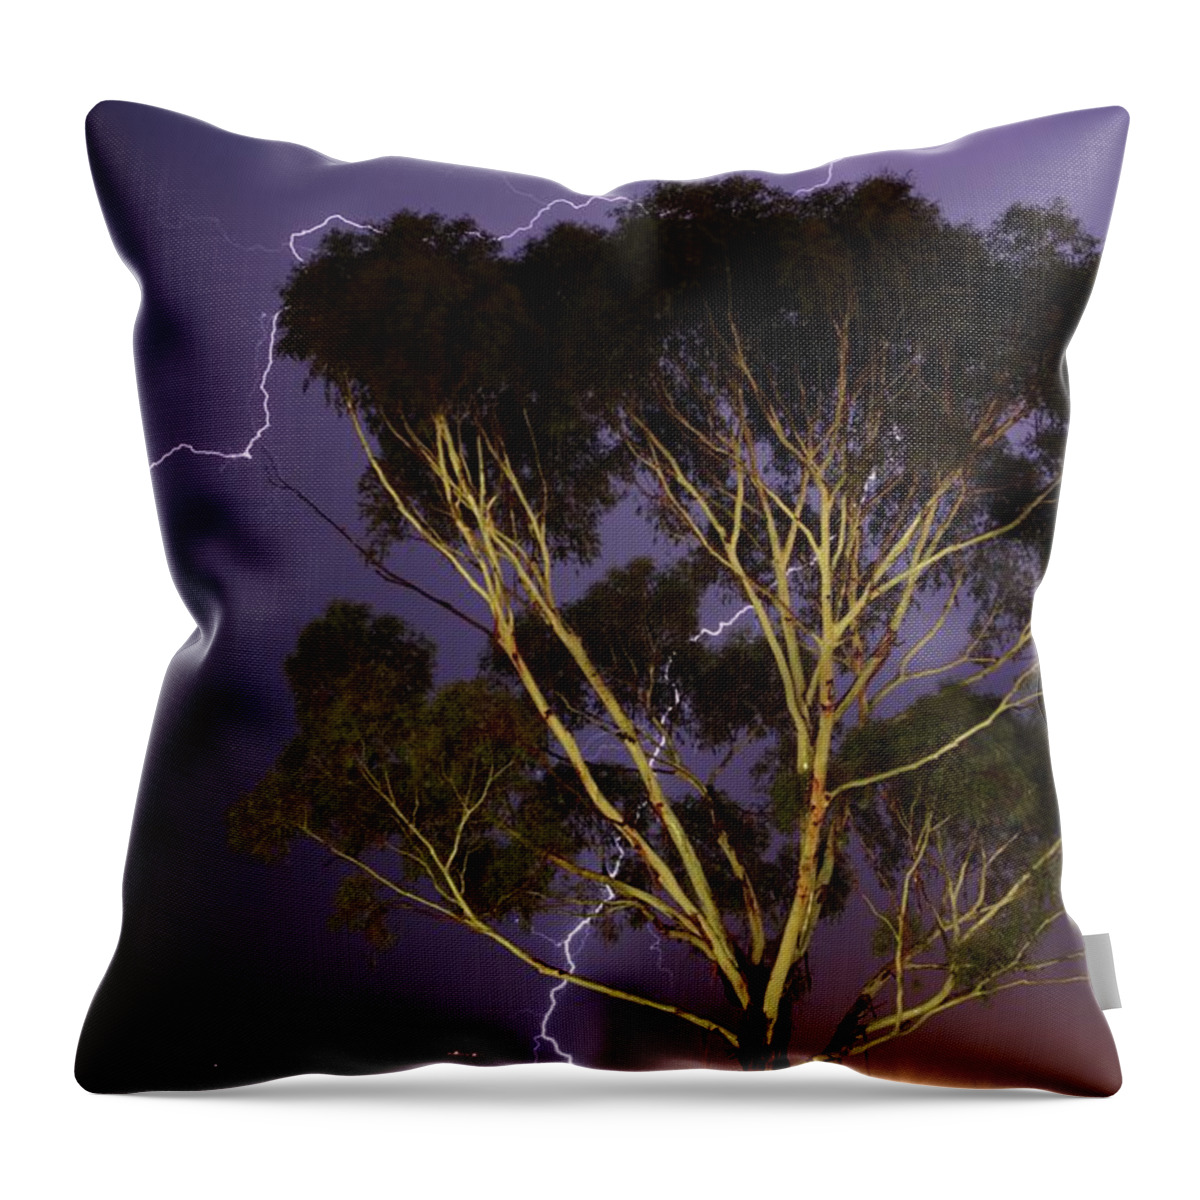 Scenics Throw Pillow featuring the photograph Portrait Of Lightning Striking Around by Neil Overy